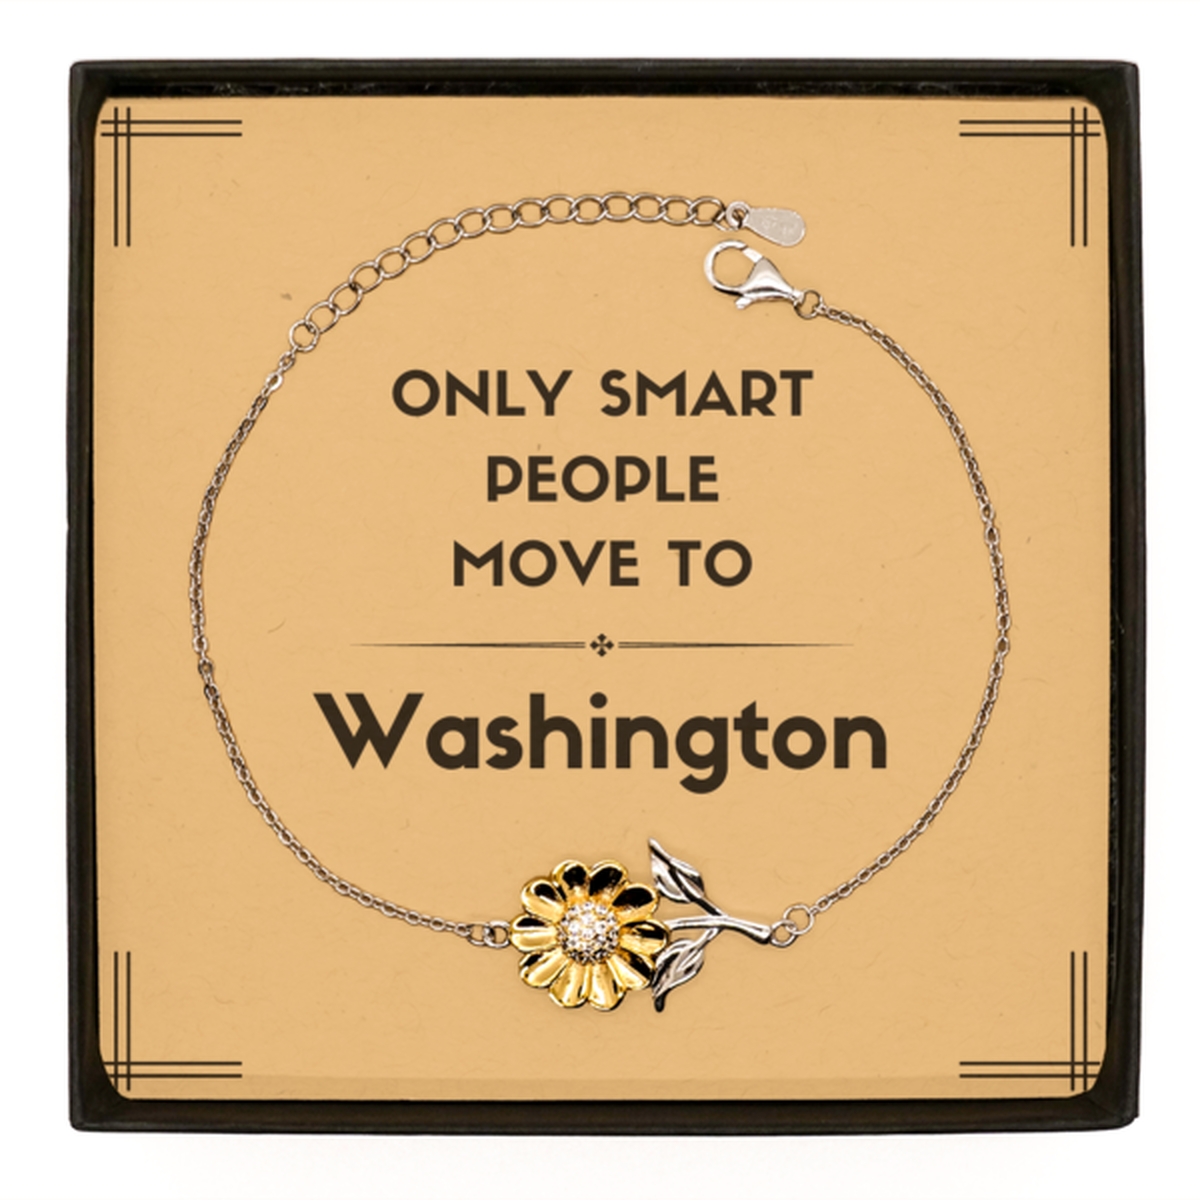 Only smart people move to Washington Sunflower Bracelet, Message Card Gifts For Washington, Move to Washington Gifts for Friends Coworker Funny Saying Quote